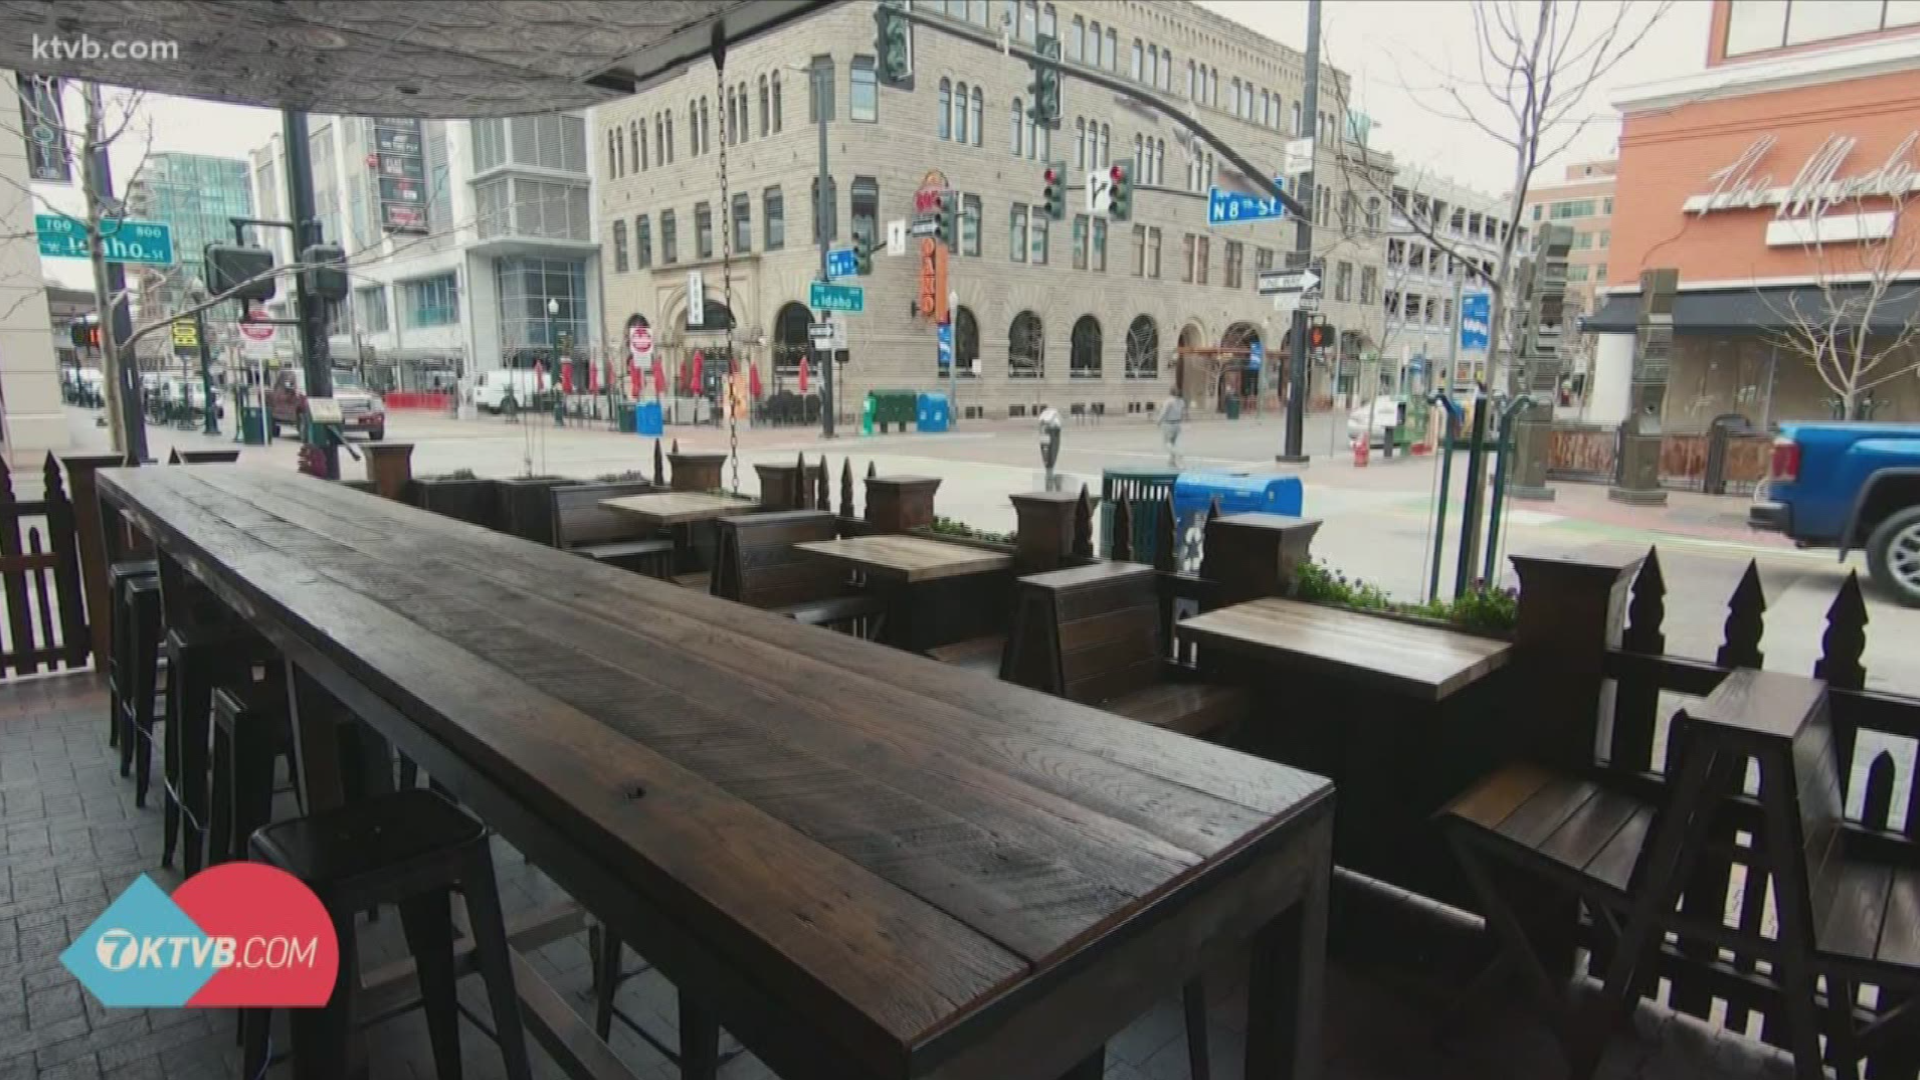 The city of Boise is looking to create more space for social distancing for local restaurants. One option is to close 8th Street.